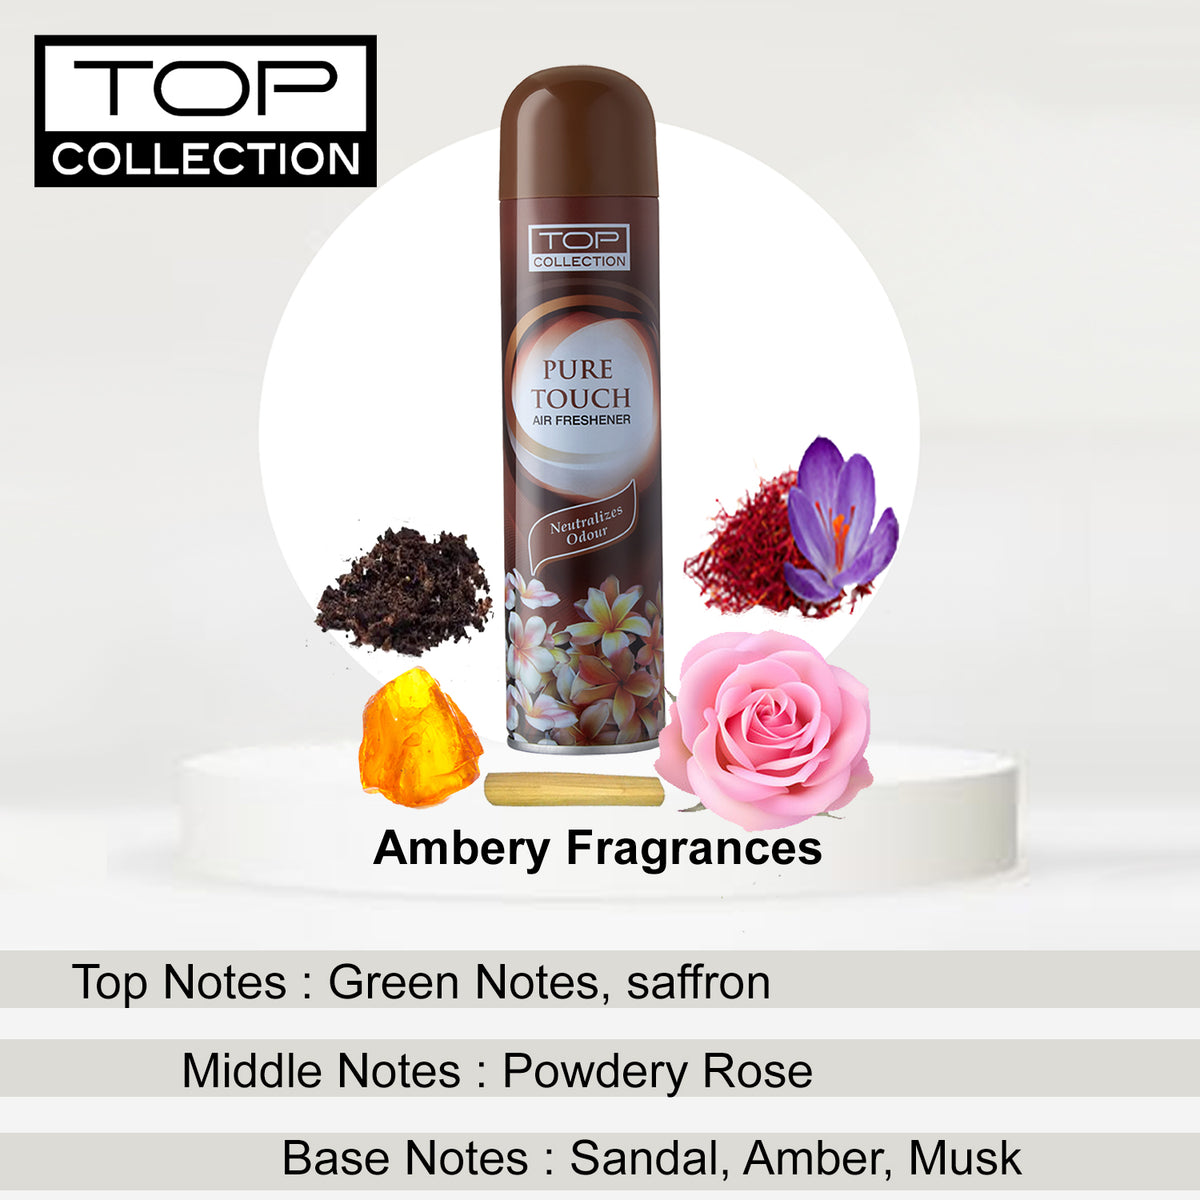 Top Collection Air Freshener - Pure Touch, 300ml